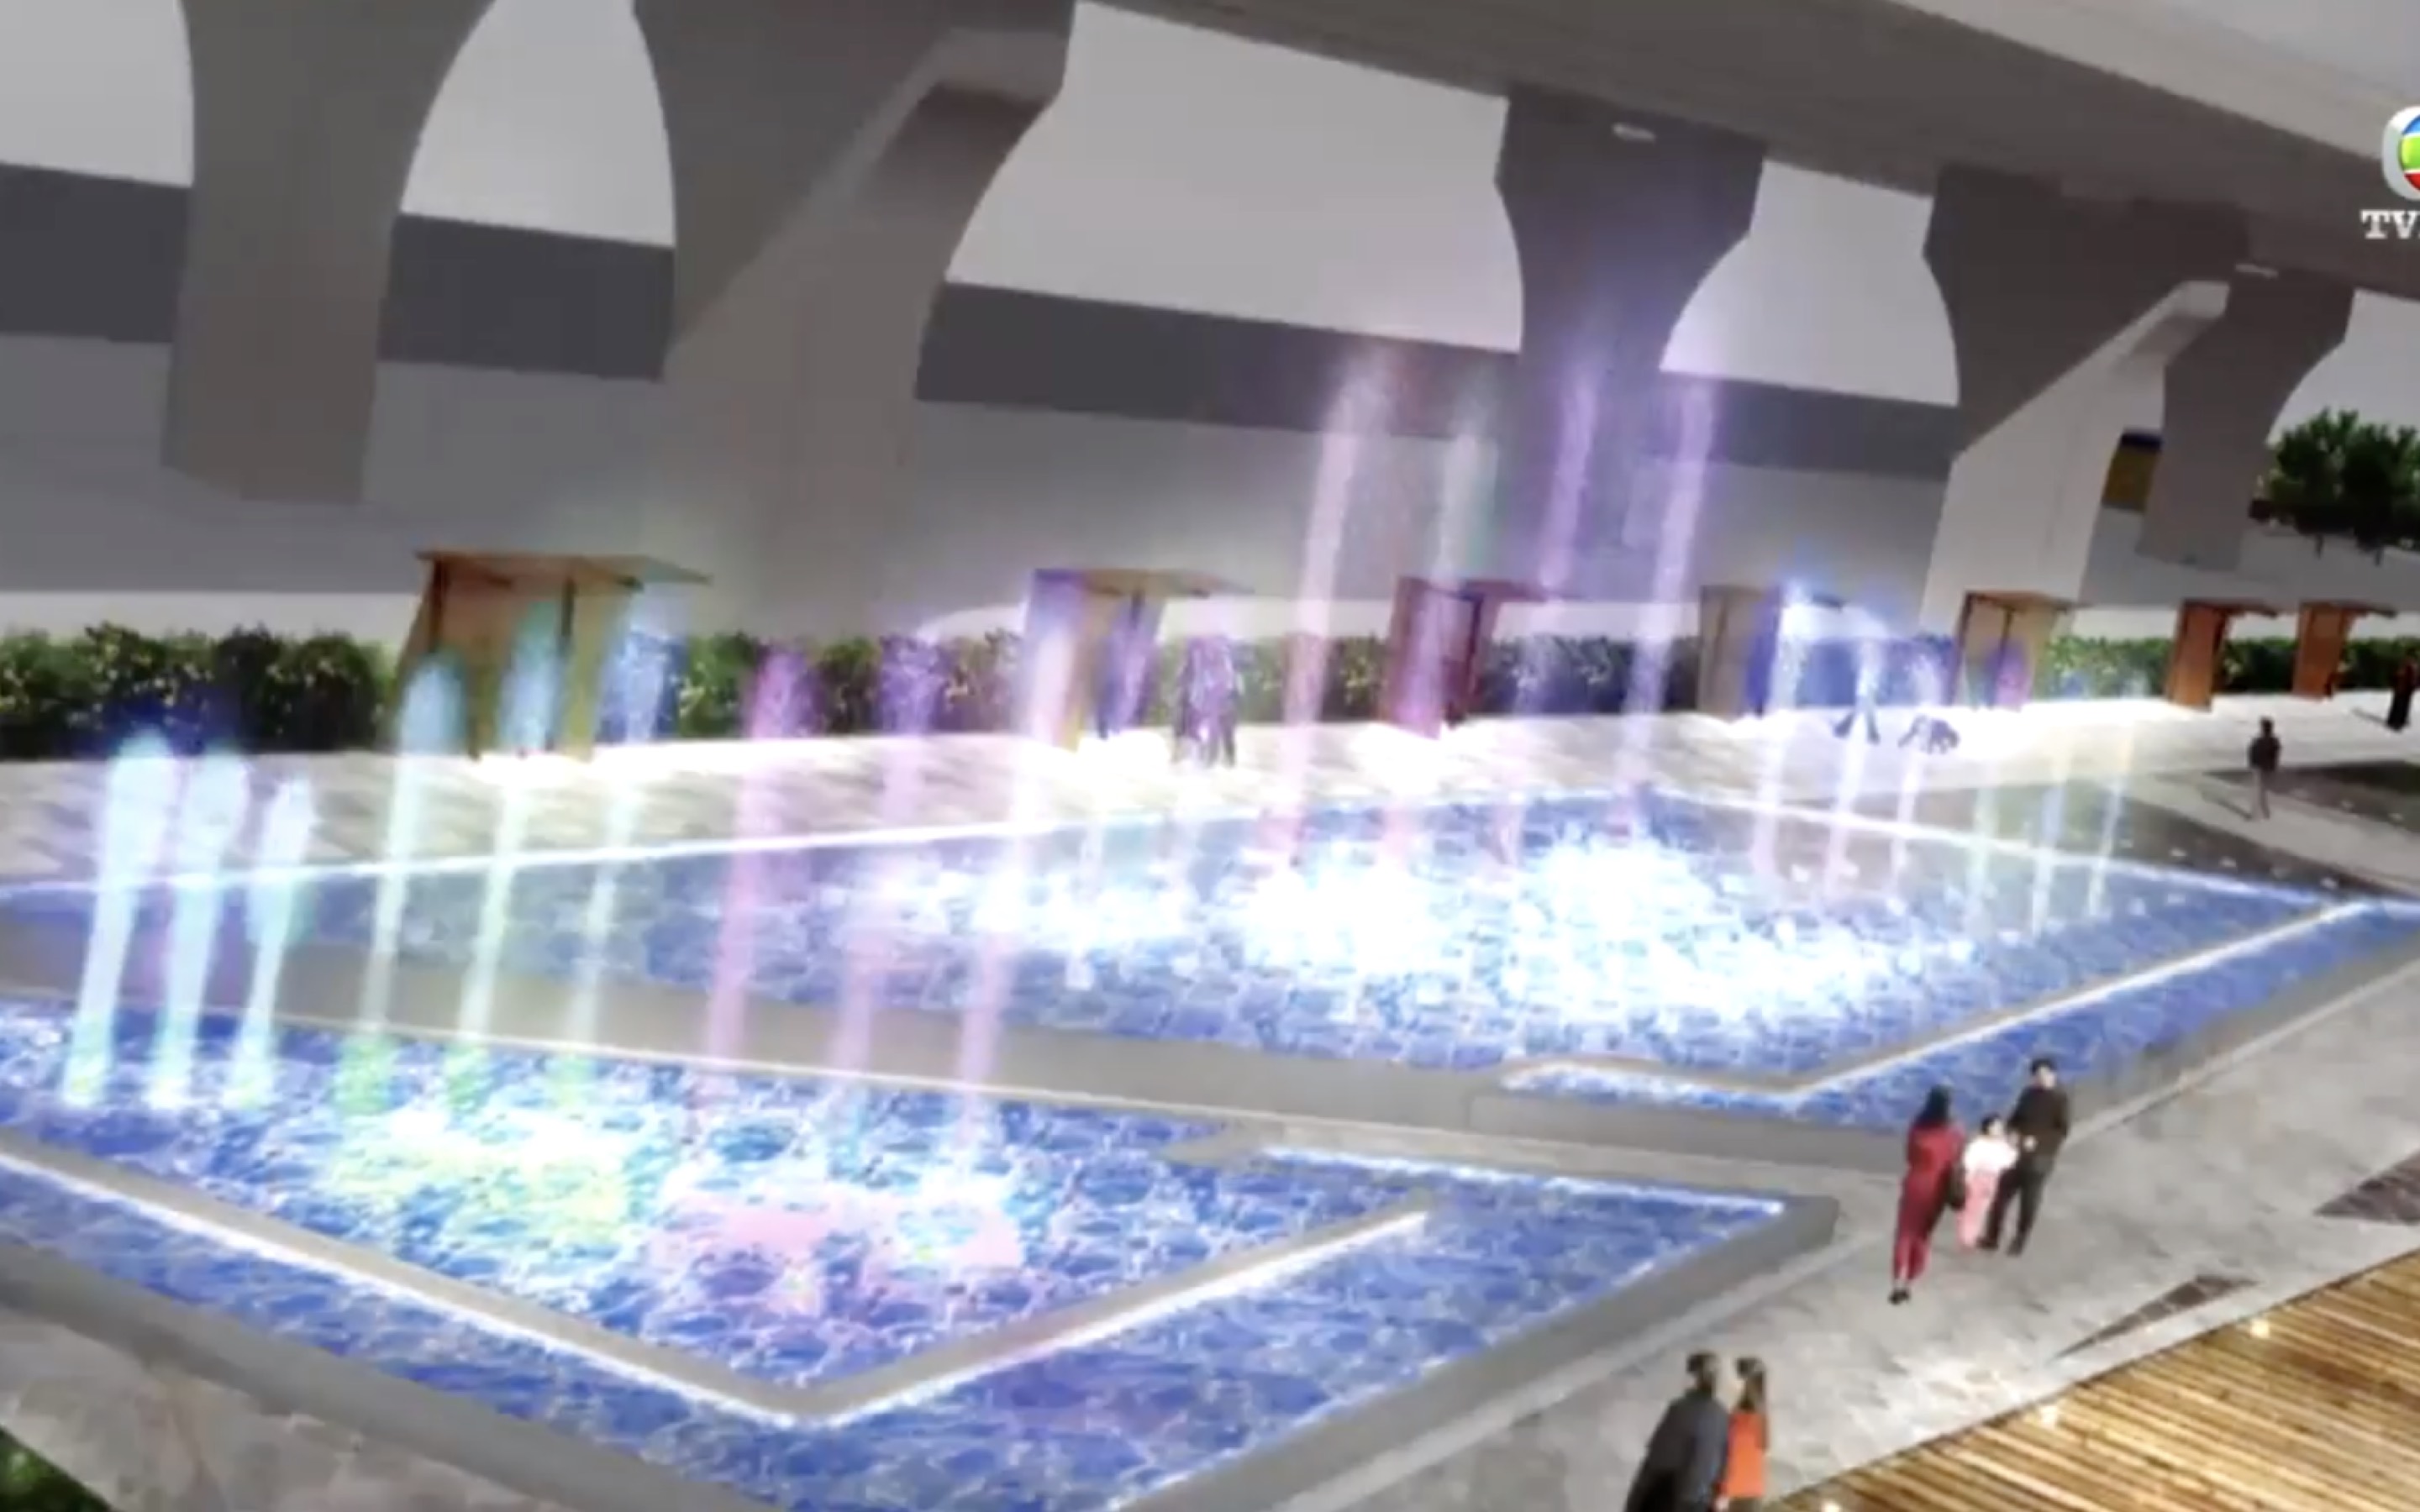 A digital rendering of a controversial musical fountain project in Kwun Tong. Screengrab via YouTube.